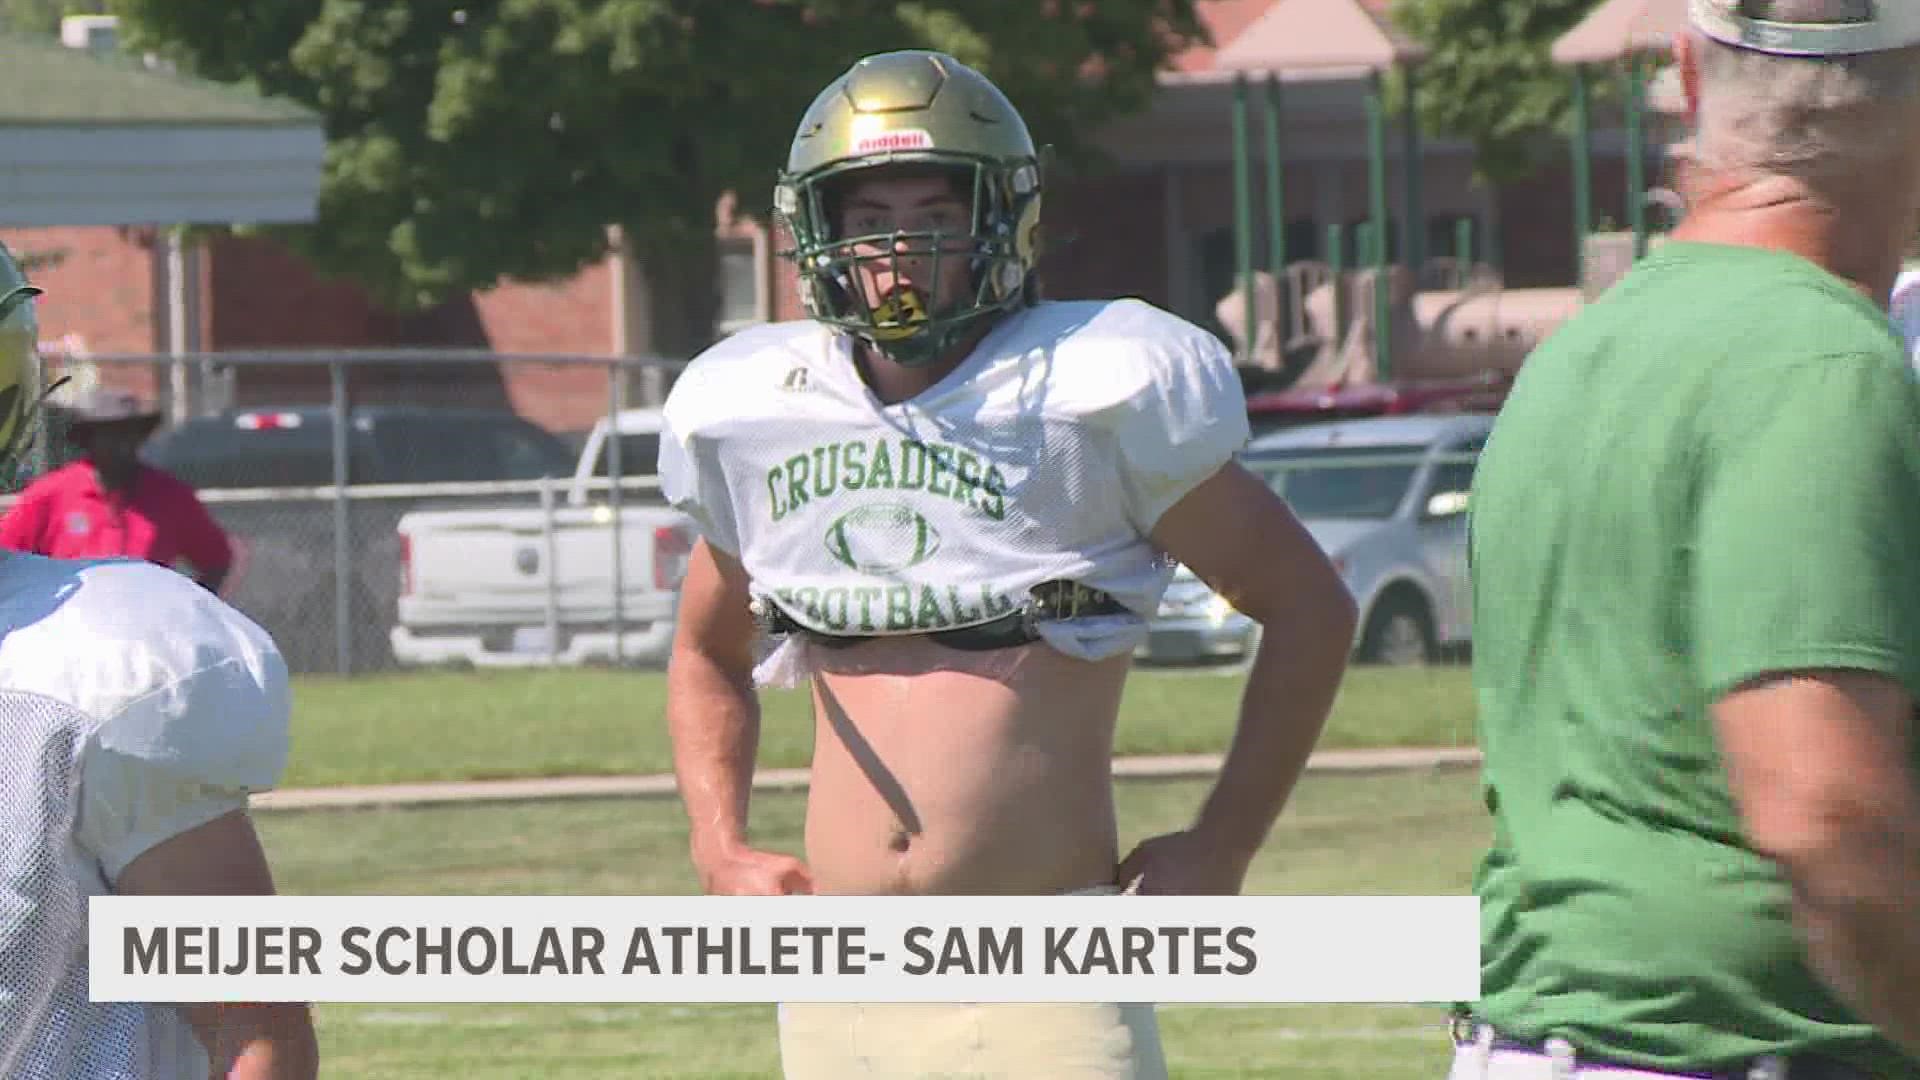 Kartes maintains a 3.93 GPA at Muskegon Catholic Central High School.